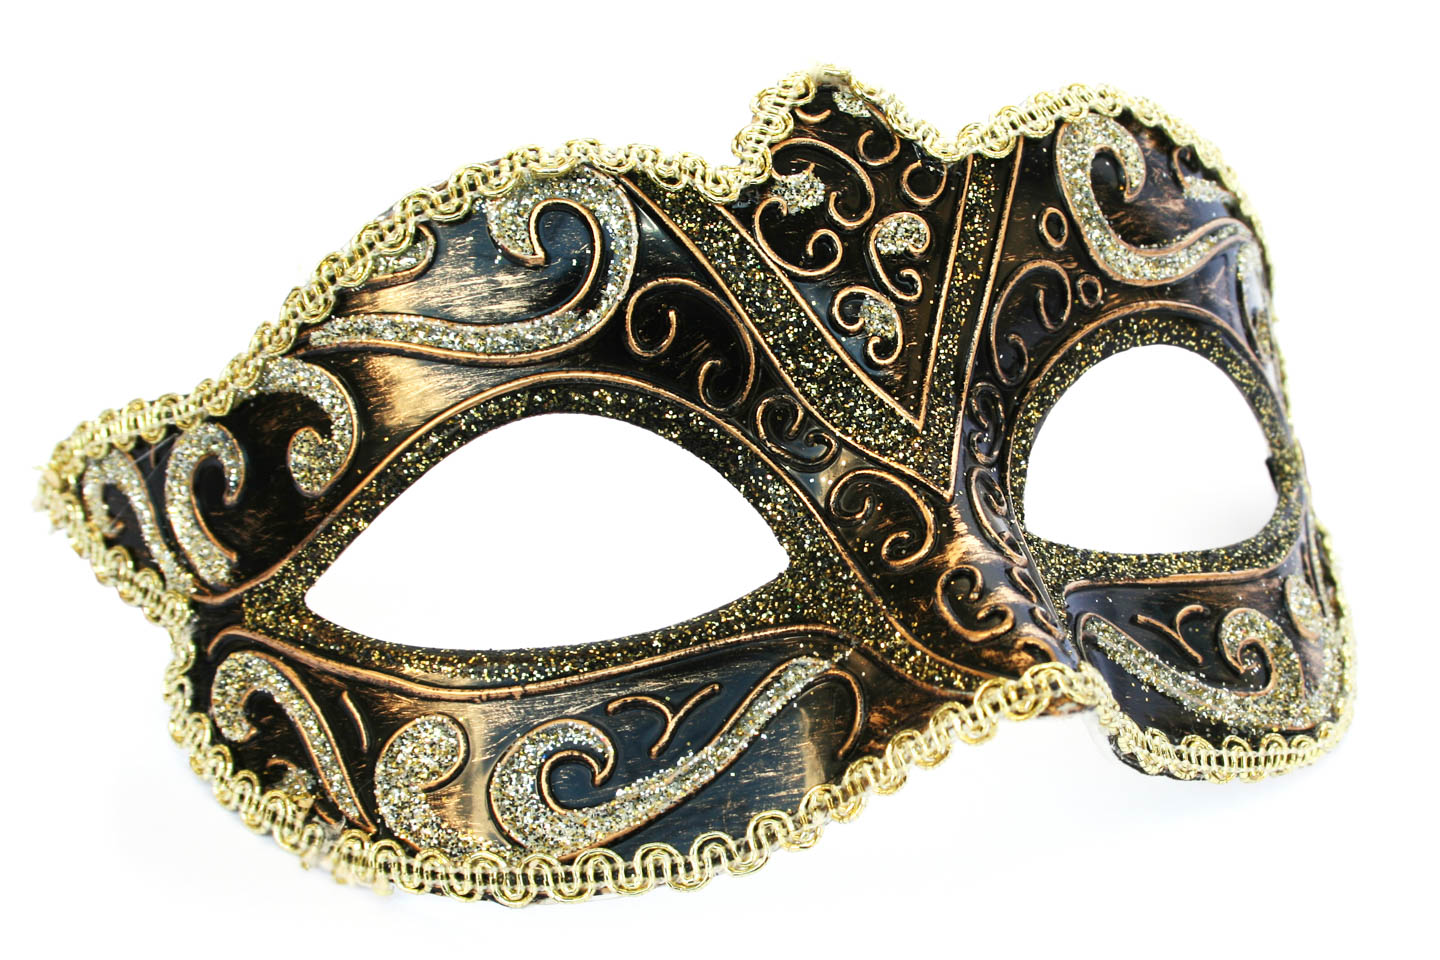 A black and gold masquerade mask for a Phantom of the Opera Party.